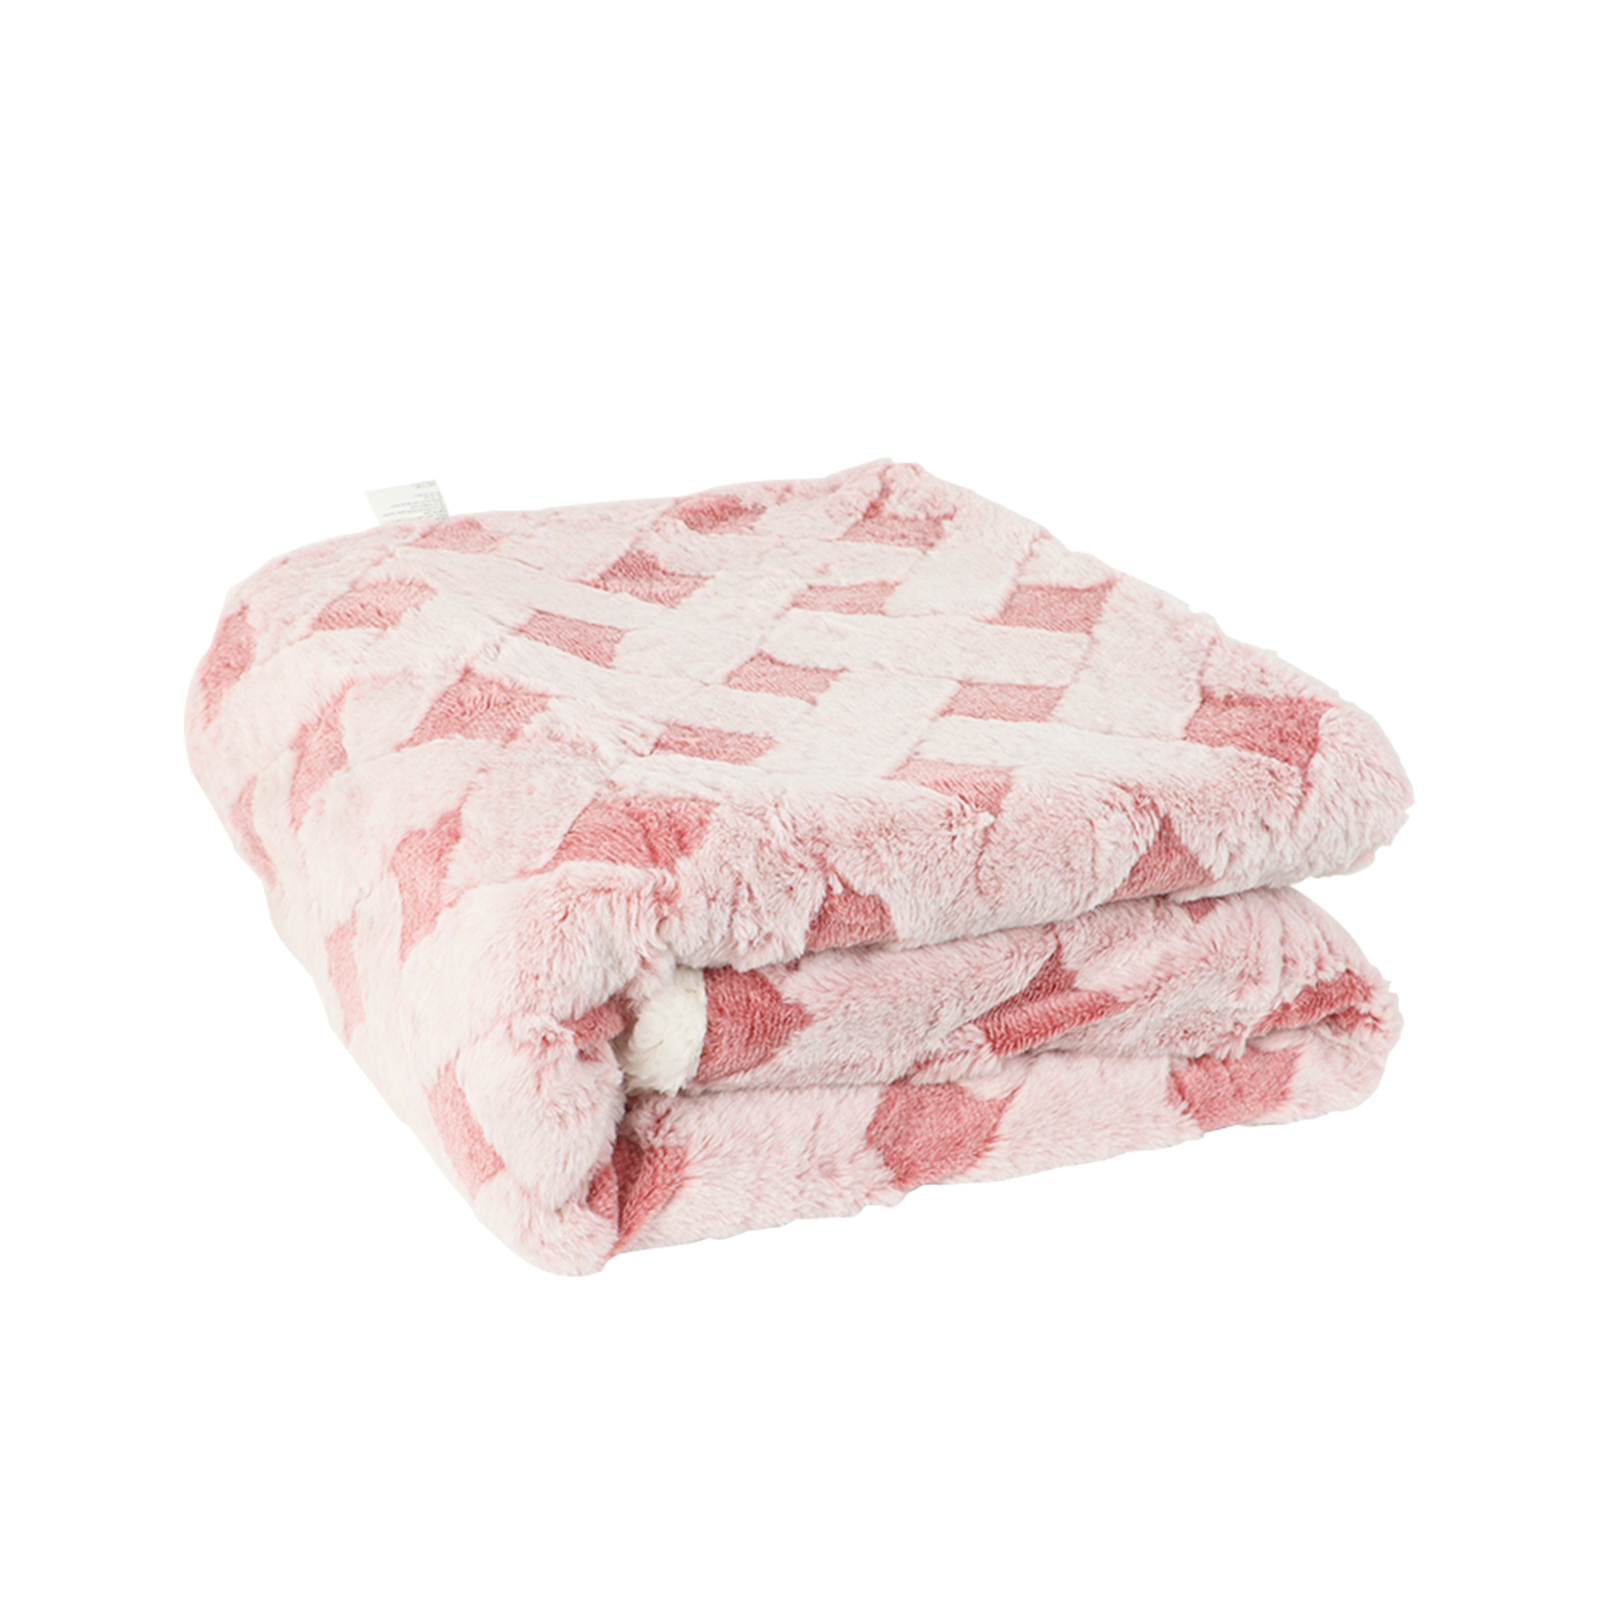 PINK FLEECE COZY SOFT BLANKETS, WITH TWO PILLOWCASE, 51*63 INCHES.